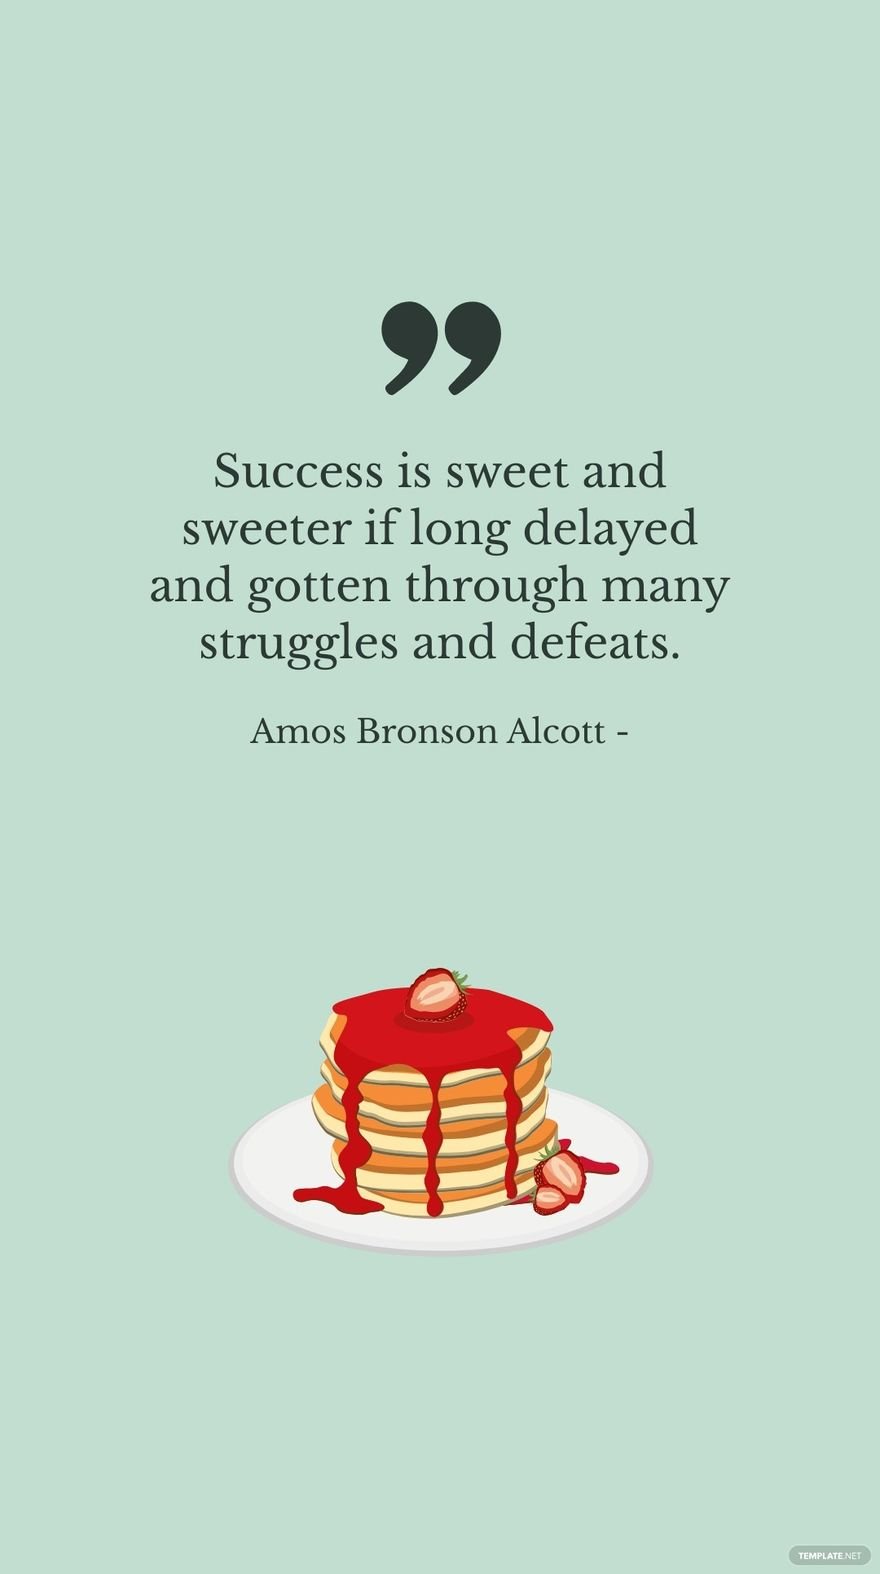 Amos Bronson Alcott - Success is sweet and sweeter if long delayed and gotten through many struggles and defeats.